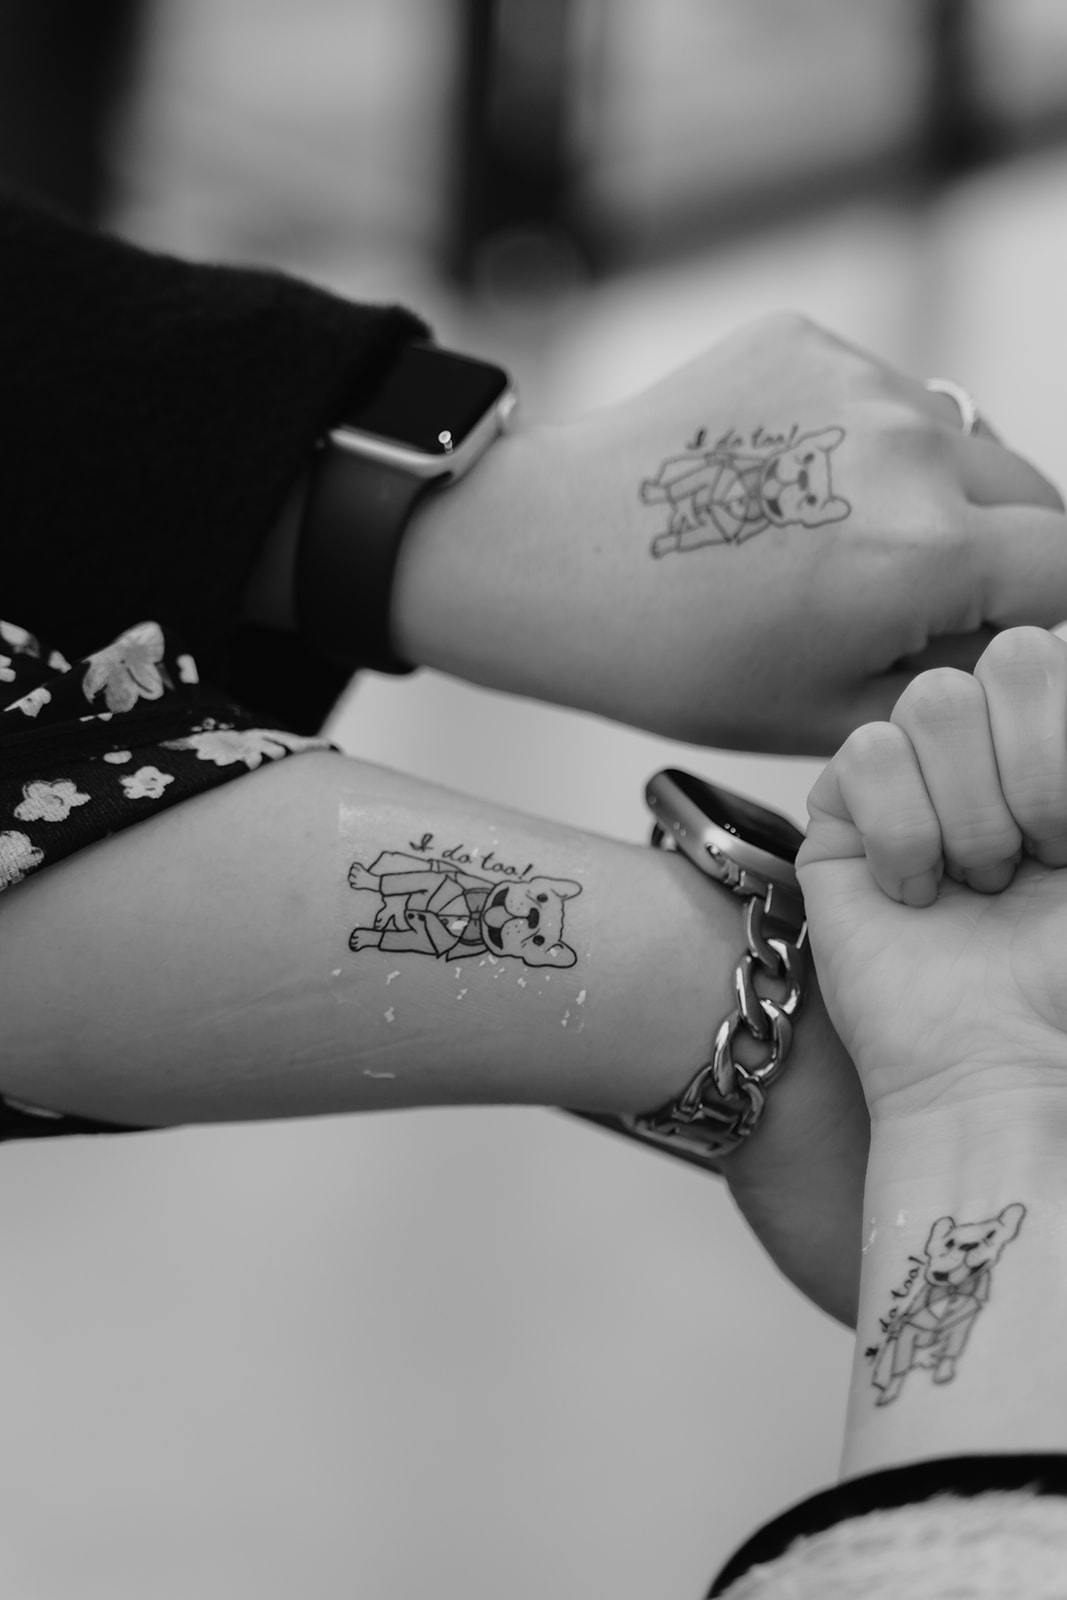 Three hands displaying temporary tattoos of whimsical drawings, with focus on the tattoos and a monochrome color scheme.